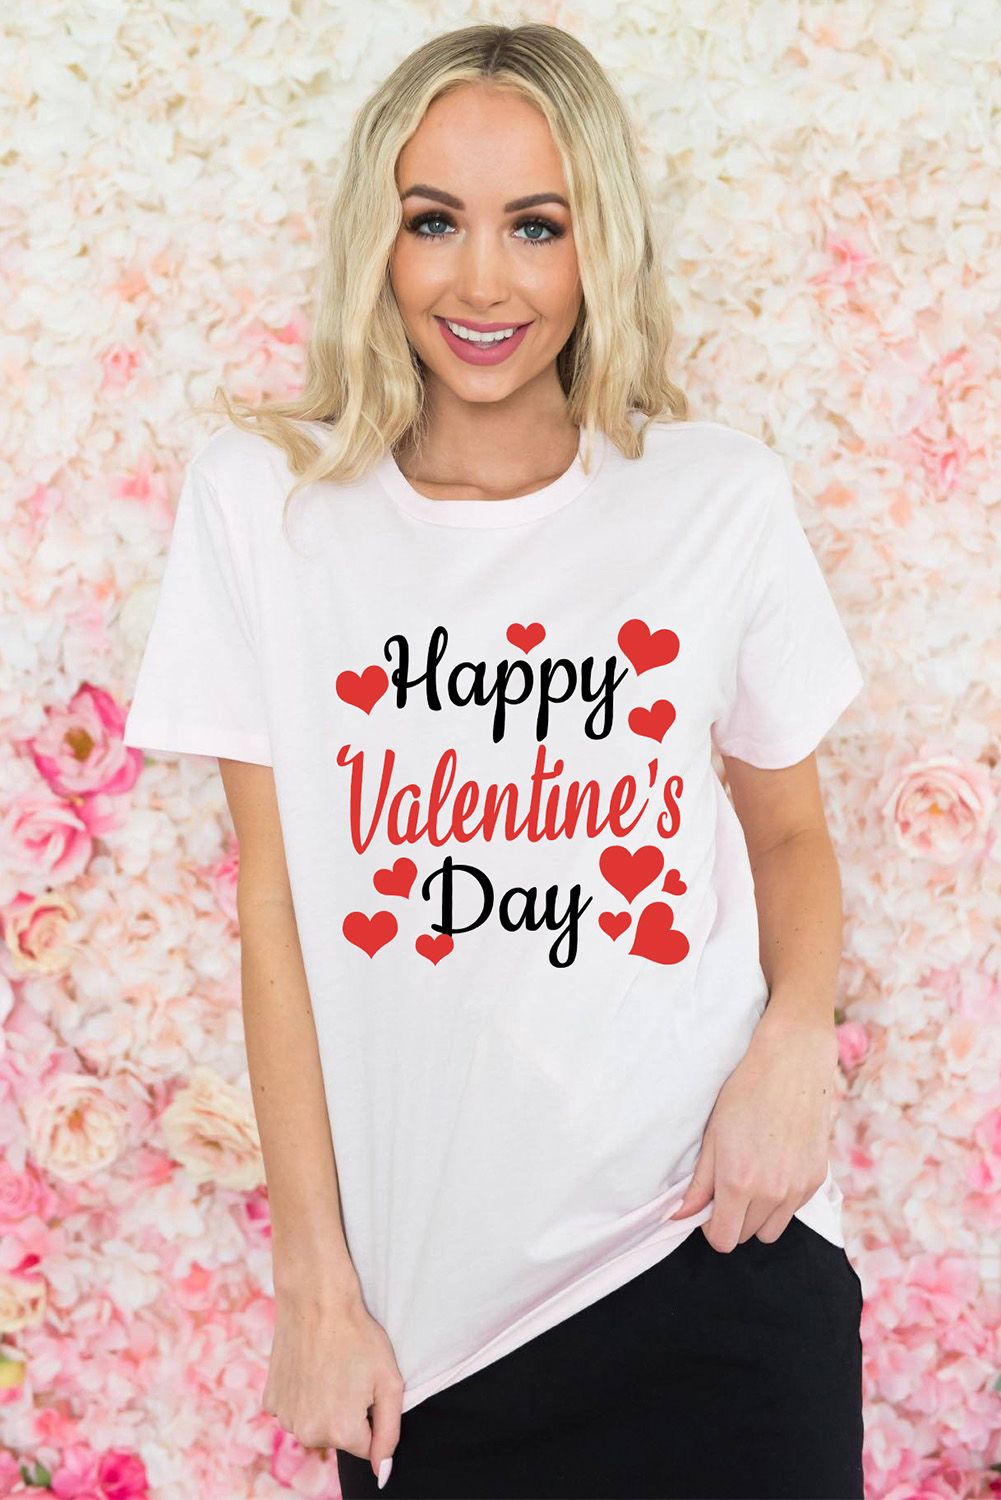 Show Your Love with Trendy Heart Print Shirts this Valentine’s Day